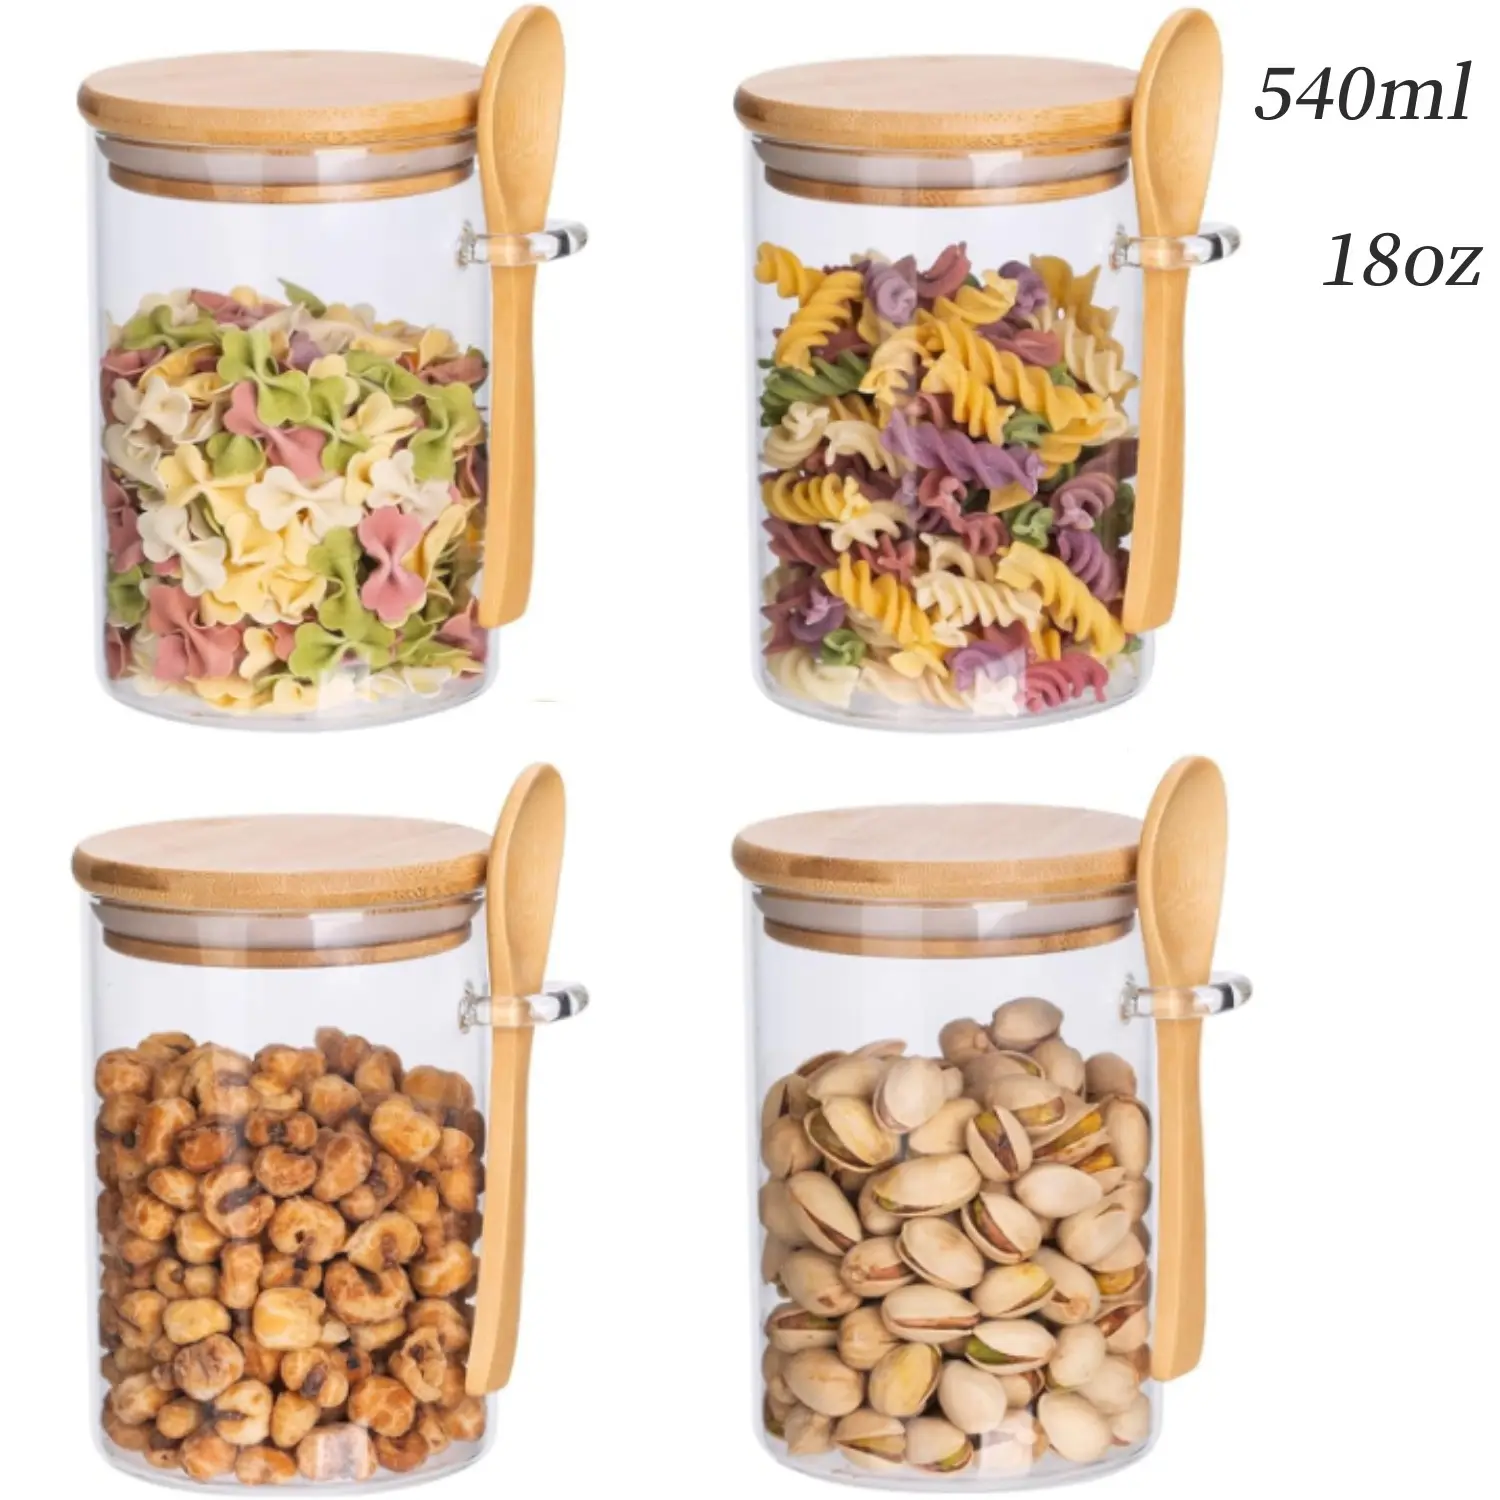 YOLOWE HOME Set 4pcs 18 oz Airtight Glass Storage Jars Spice Jar with Lids for Kitchen Organization Food Storage Containers